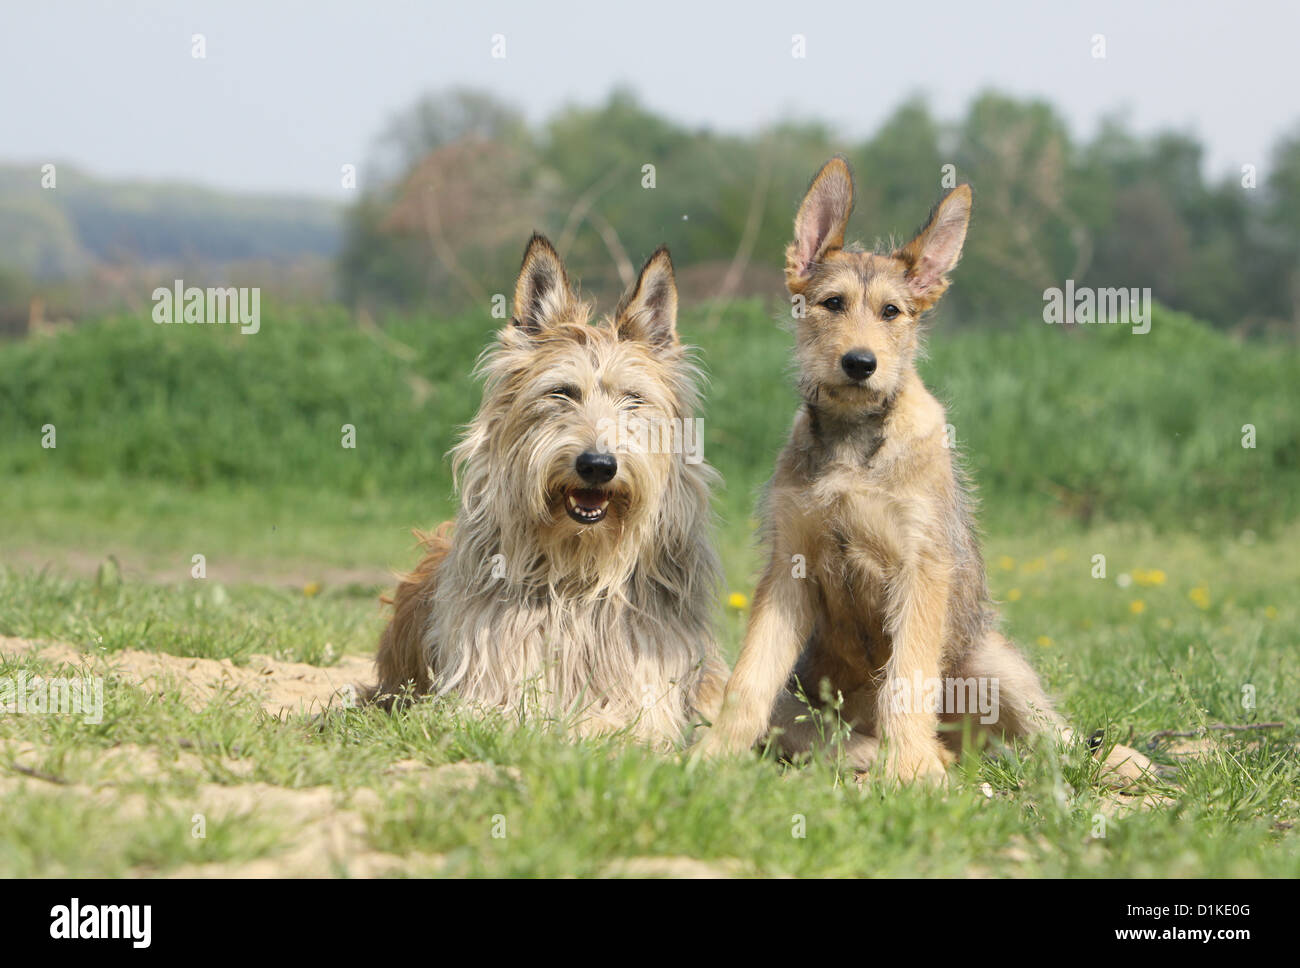 Dog Berger Picard /  Picardy Shepherd adult and puppy in a meadow Stock Photo